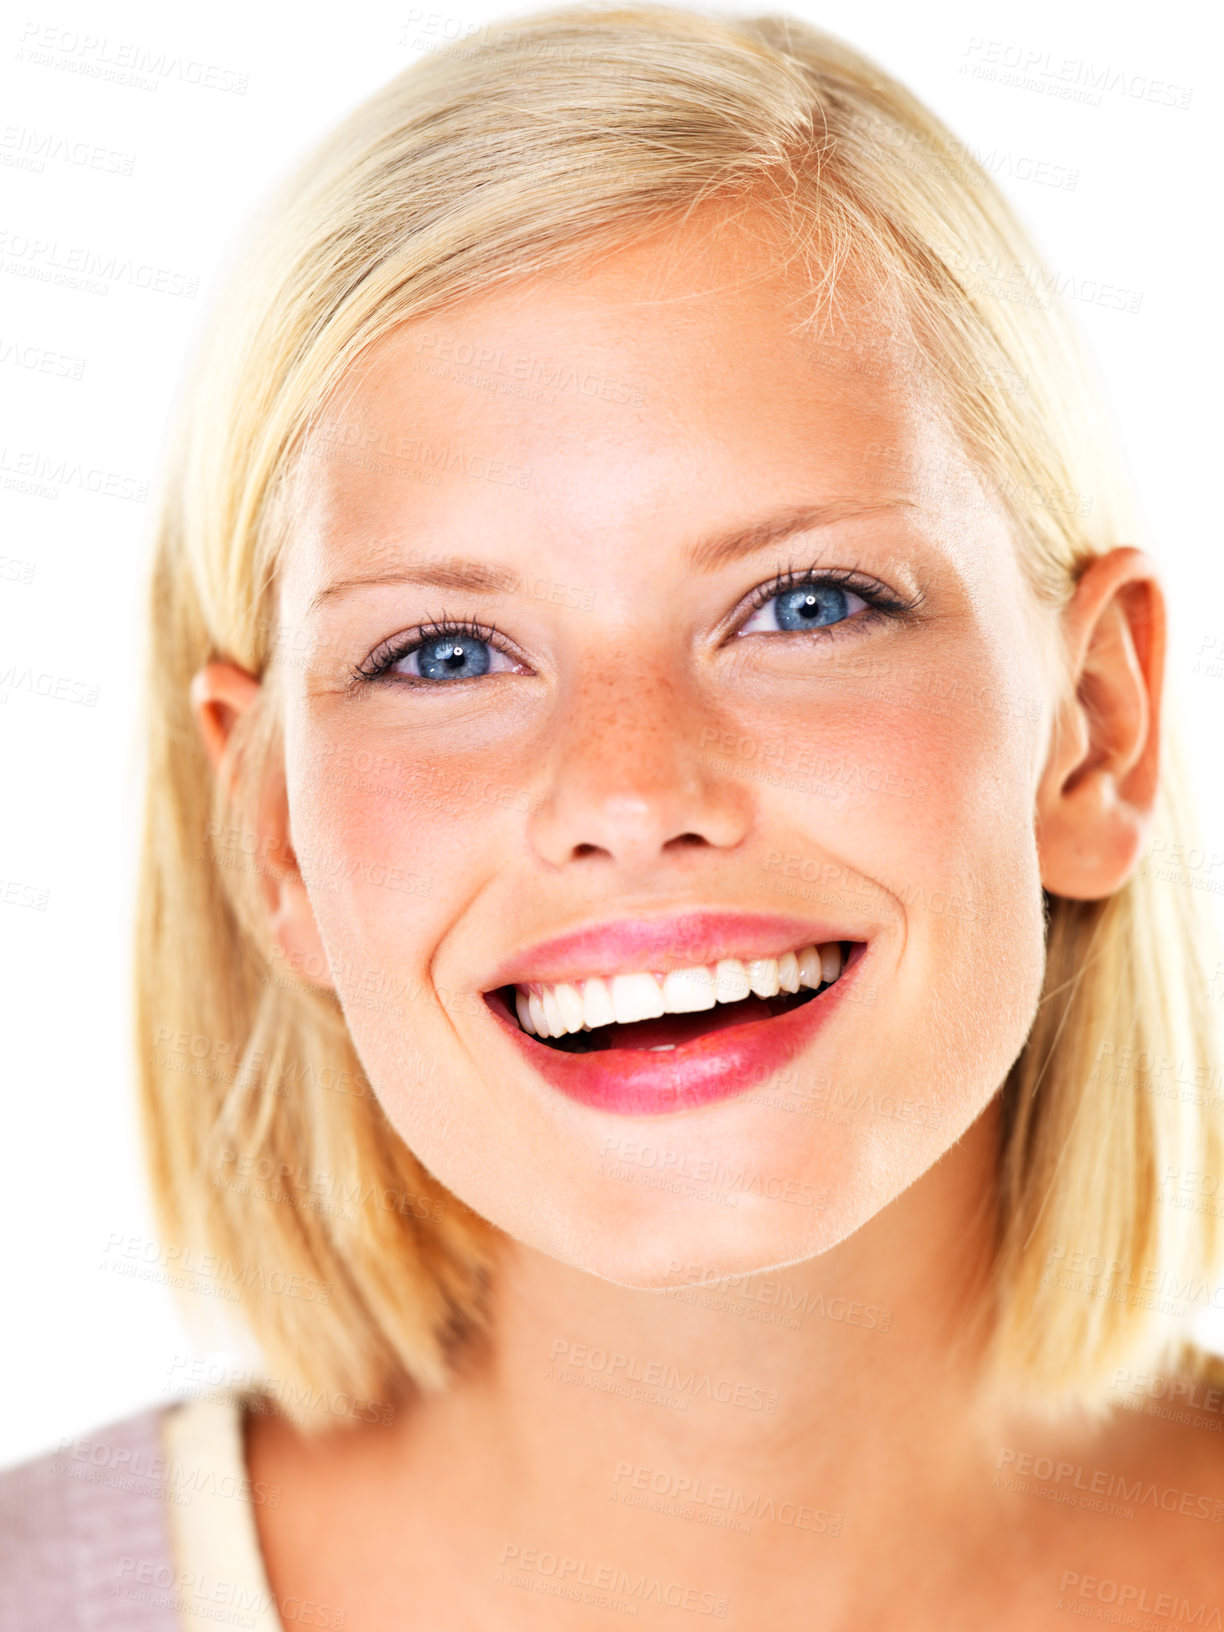 Buy stock photo Beautiful young blond woman smiling and laughing happily